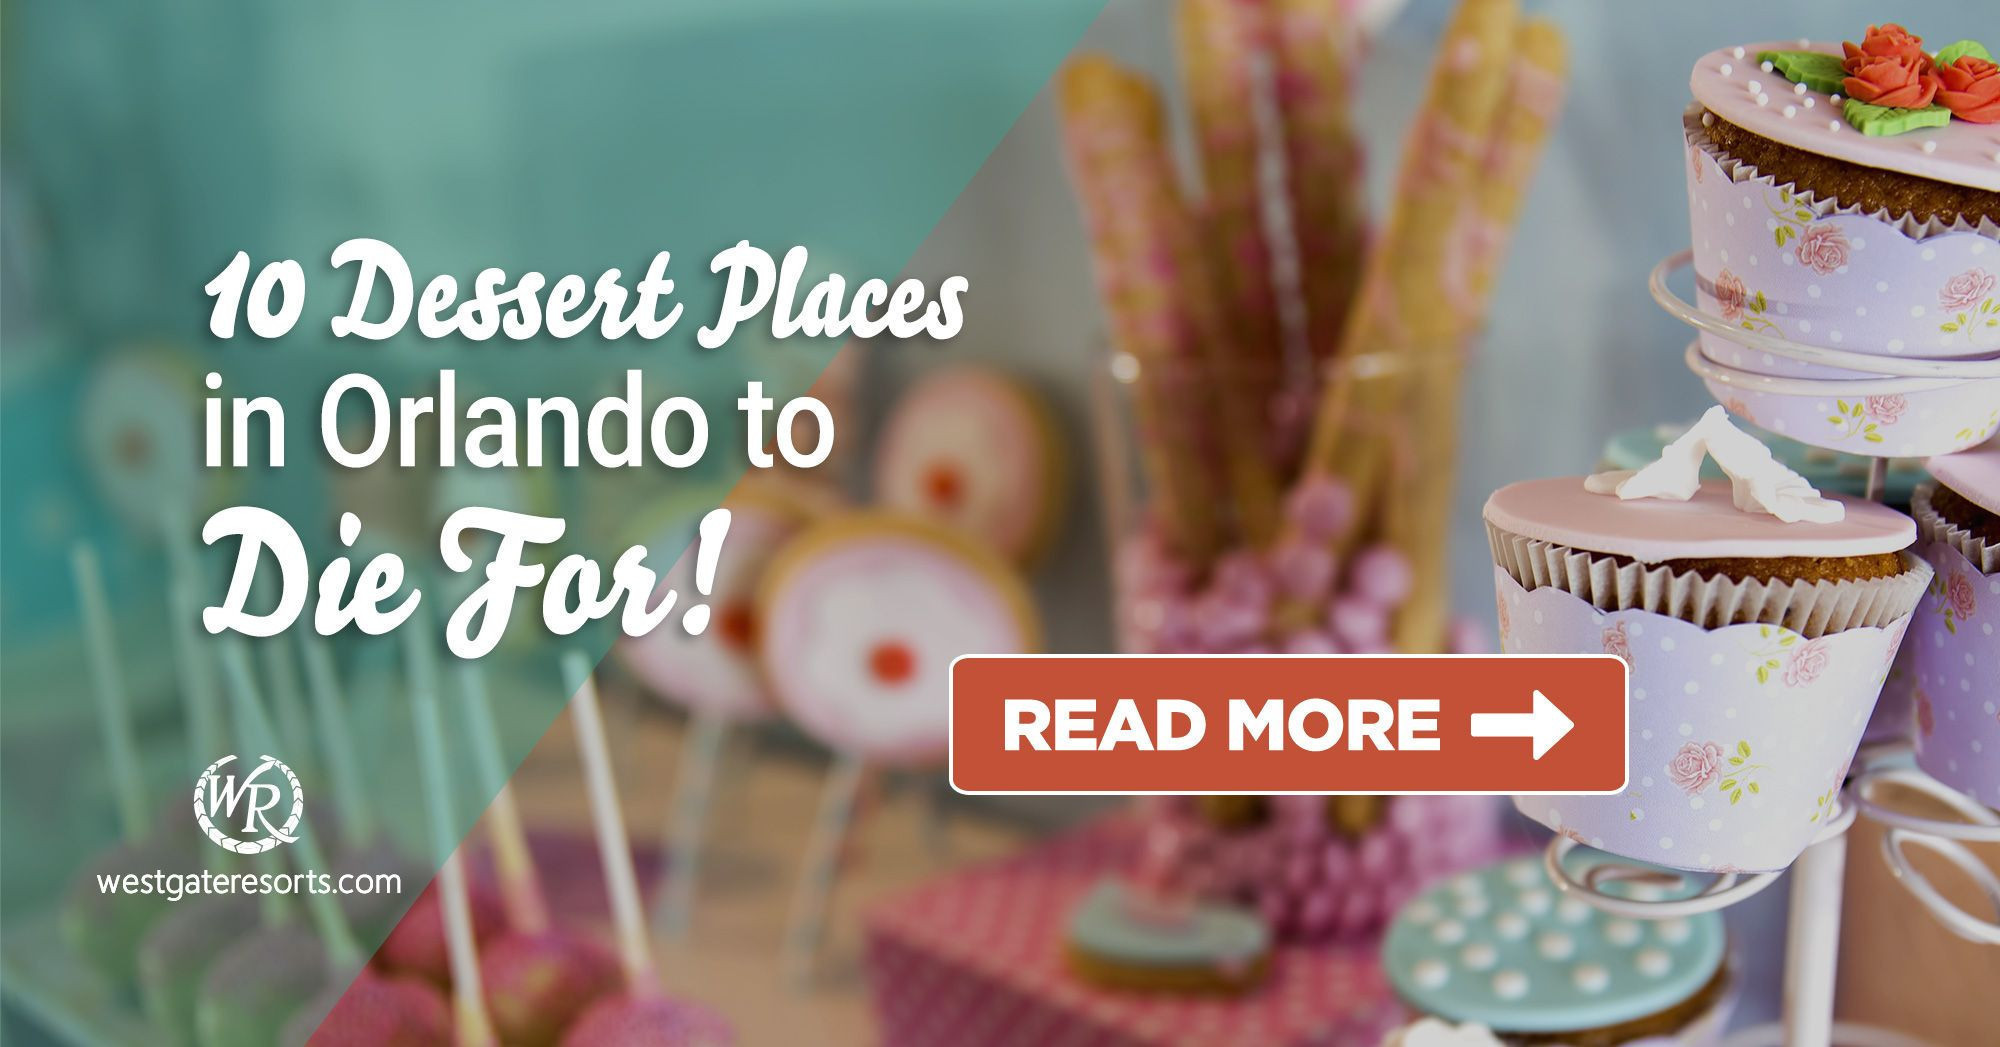 10 Dessert Places in Orlando to Die For!